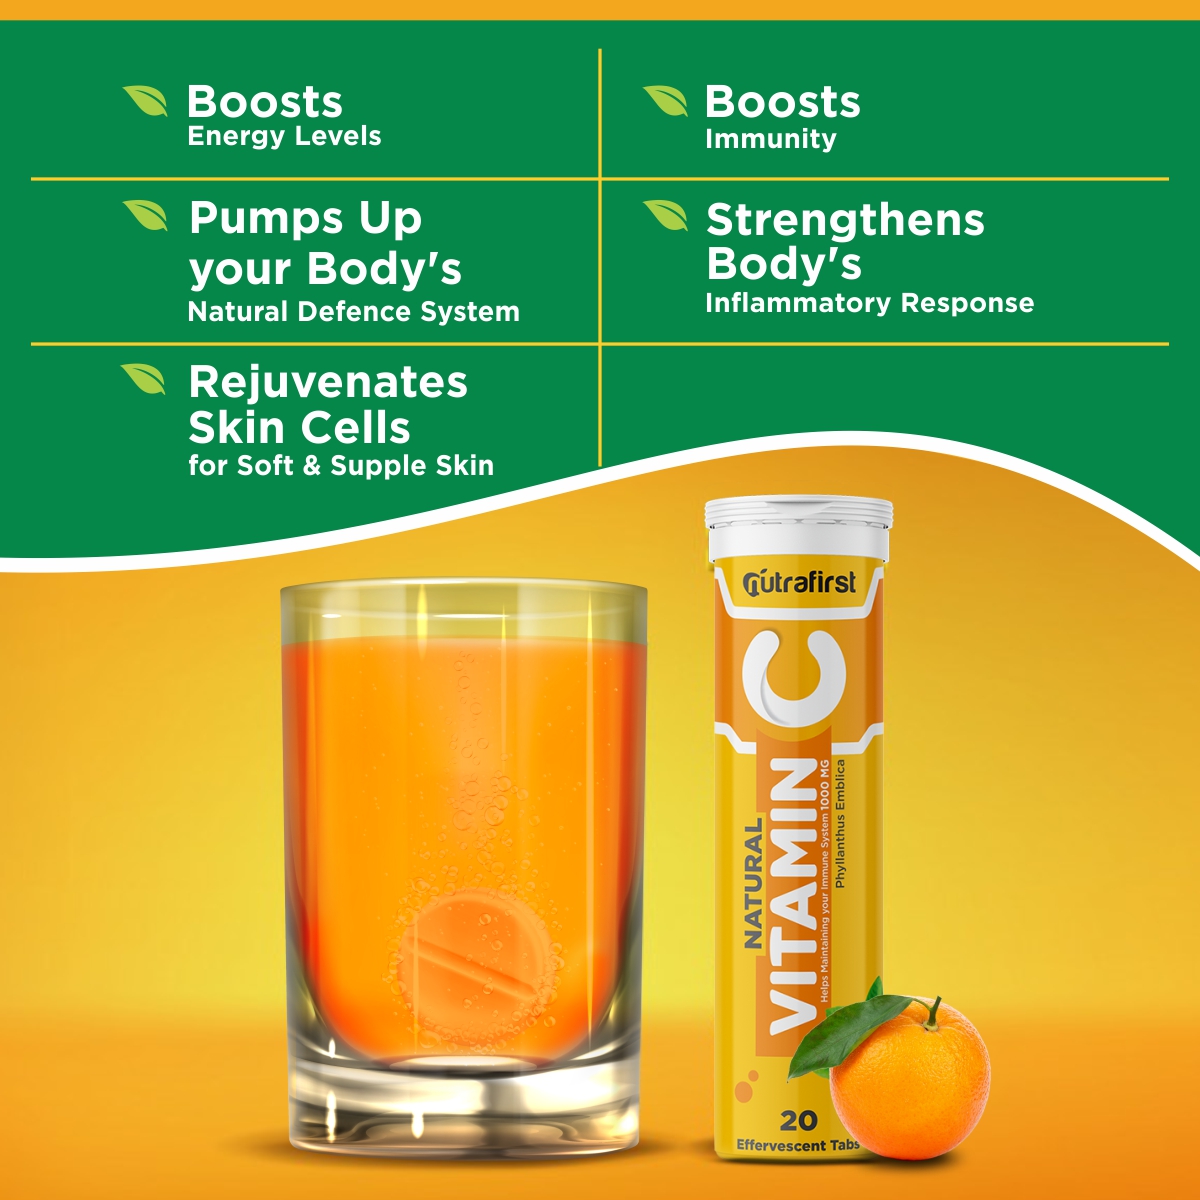 Nutrafirst Vitamin C & Zinc to Boost Energy and Immunity – 20 Effervescent Tablets